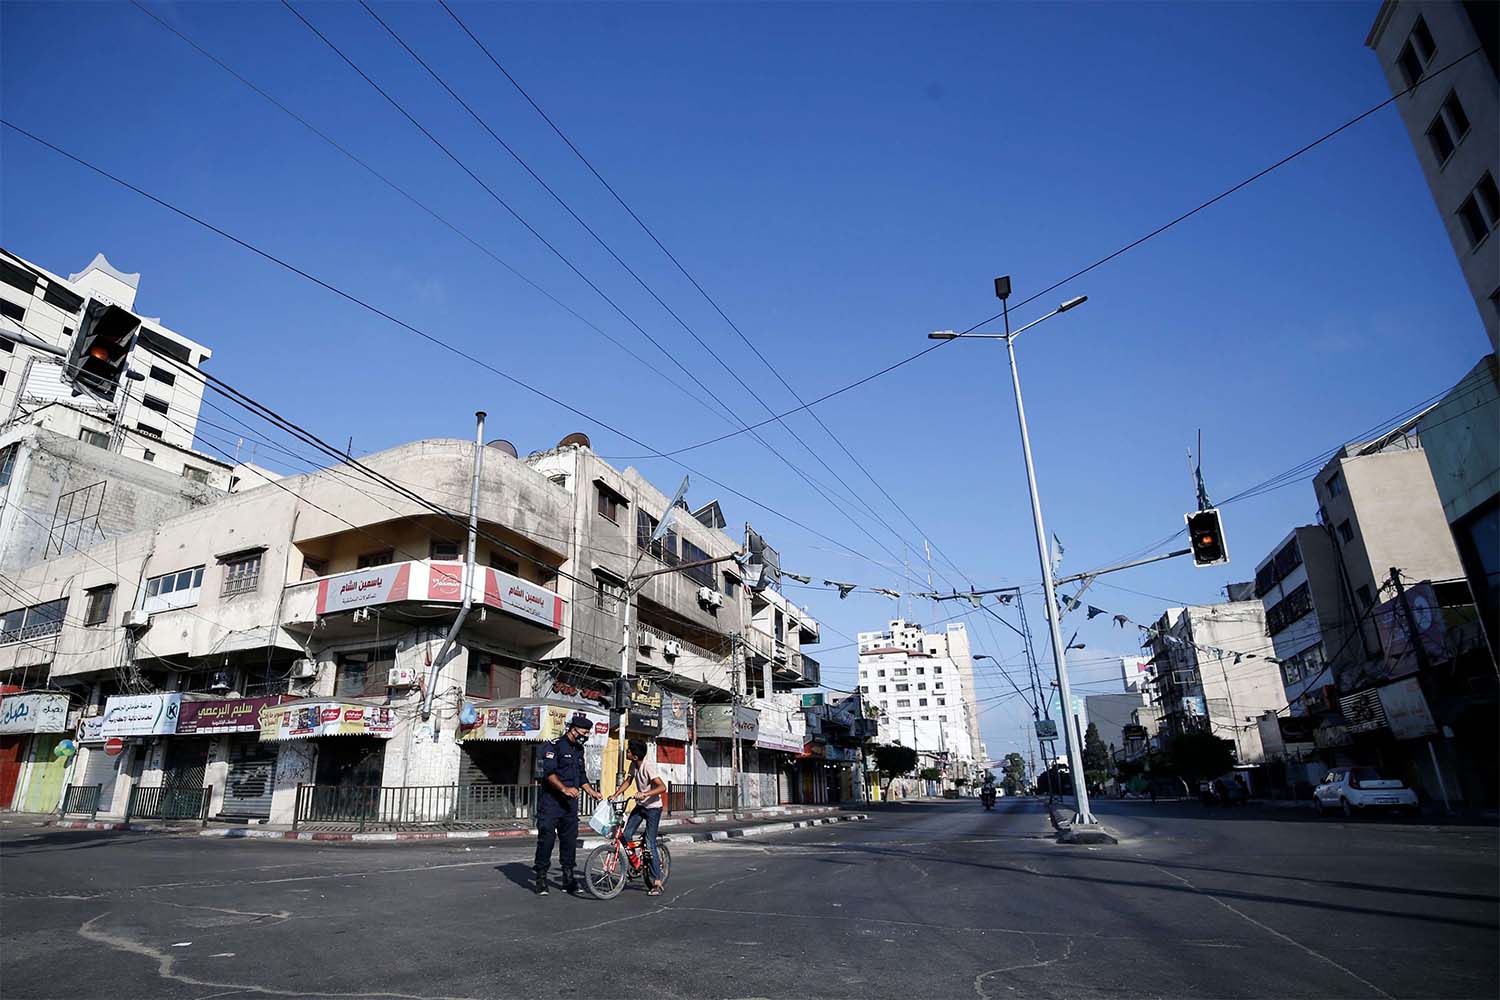 Gaza's streets are largely deserted due to the lockdown